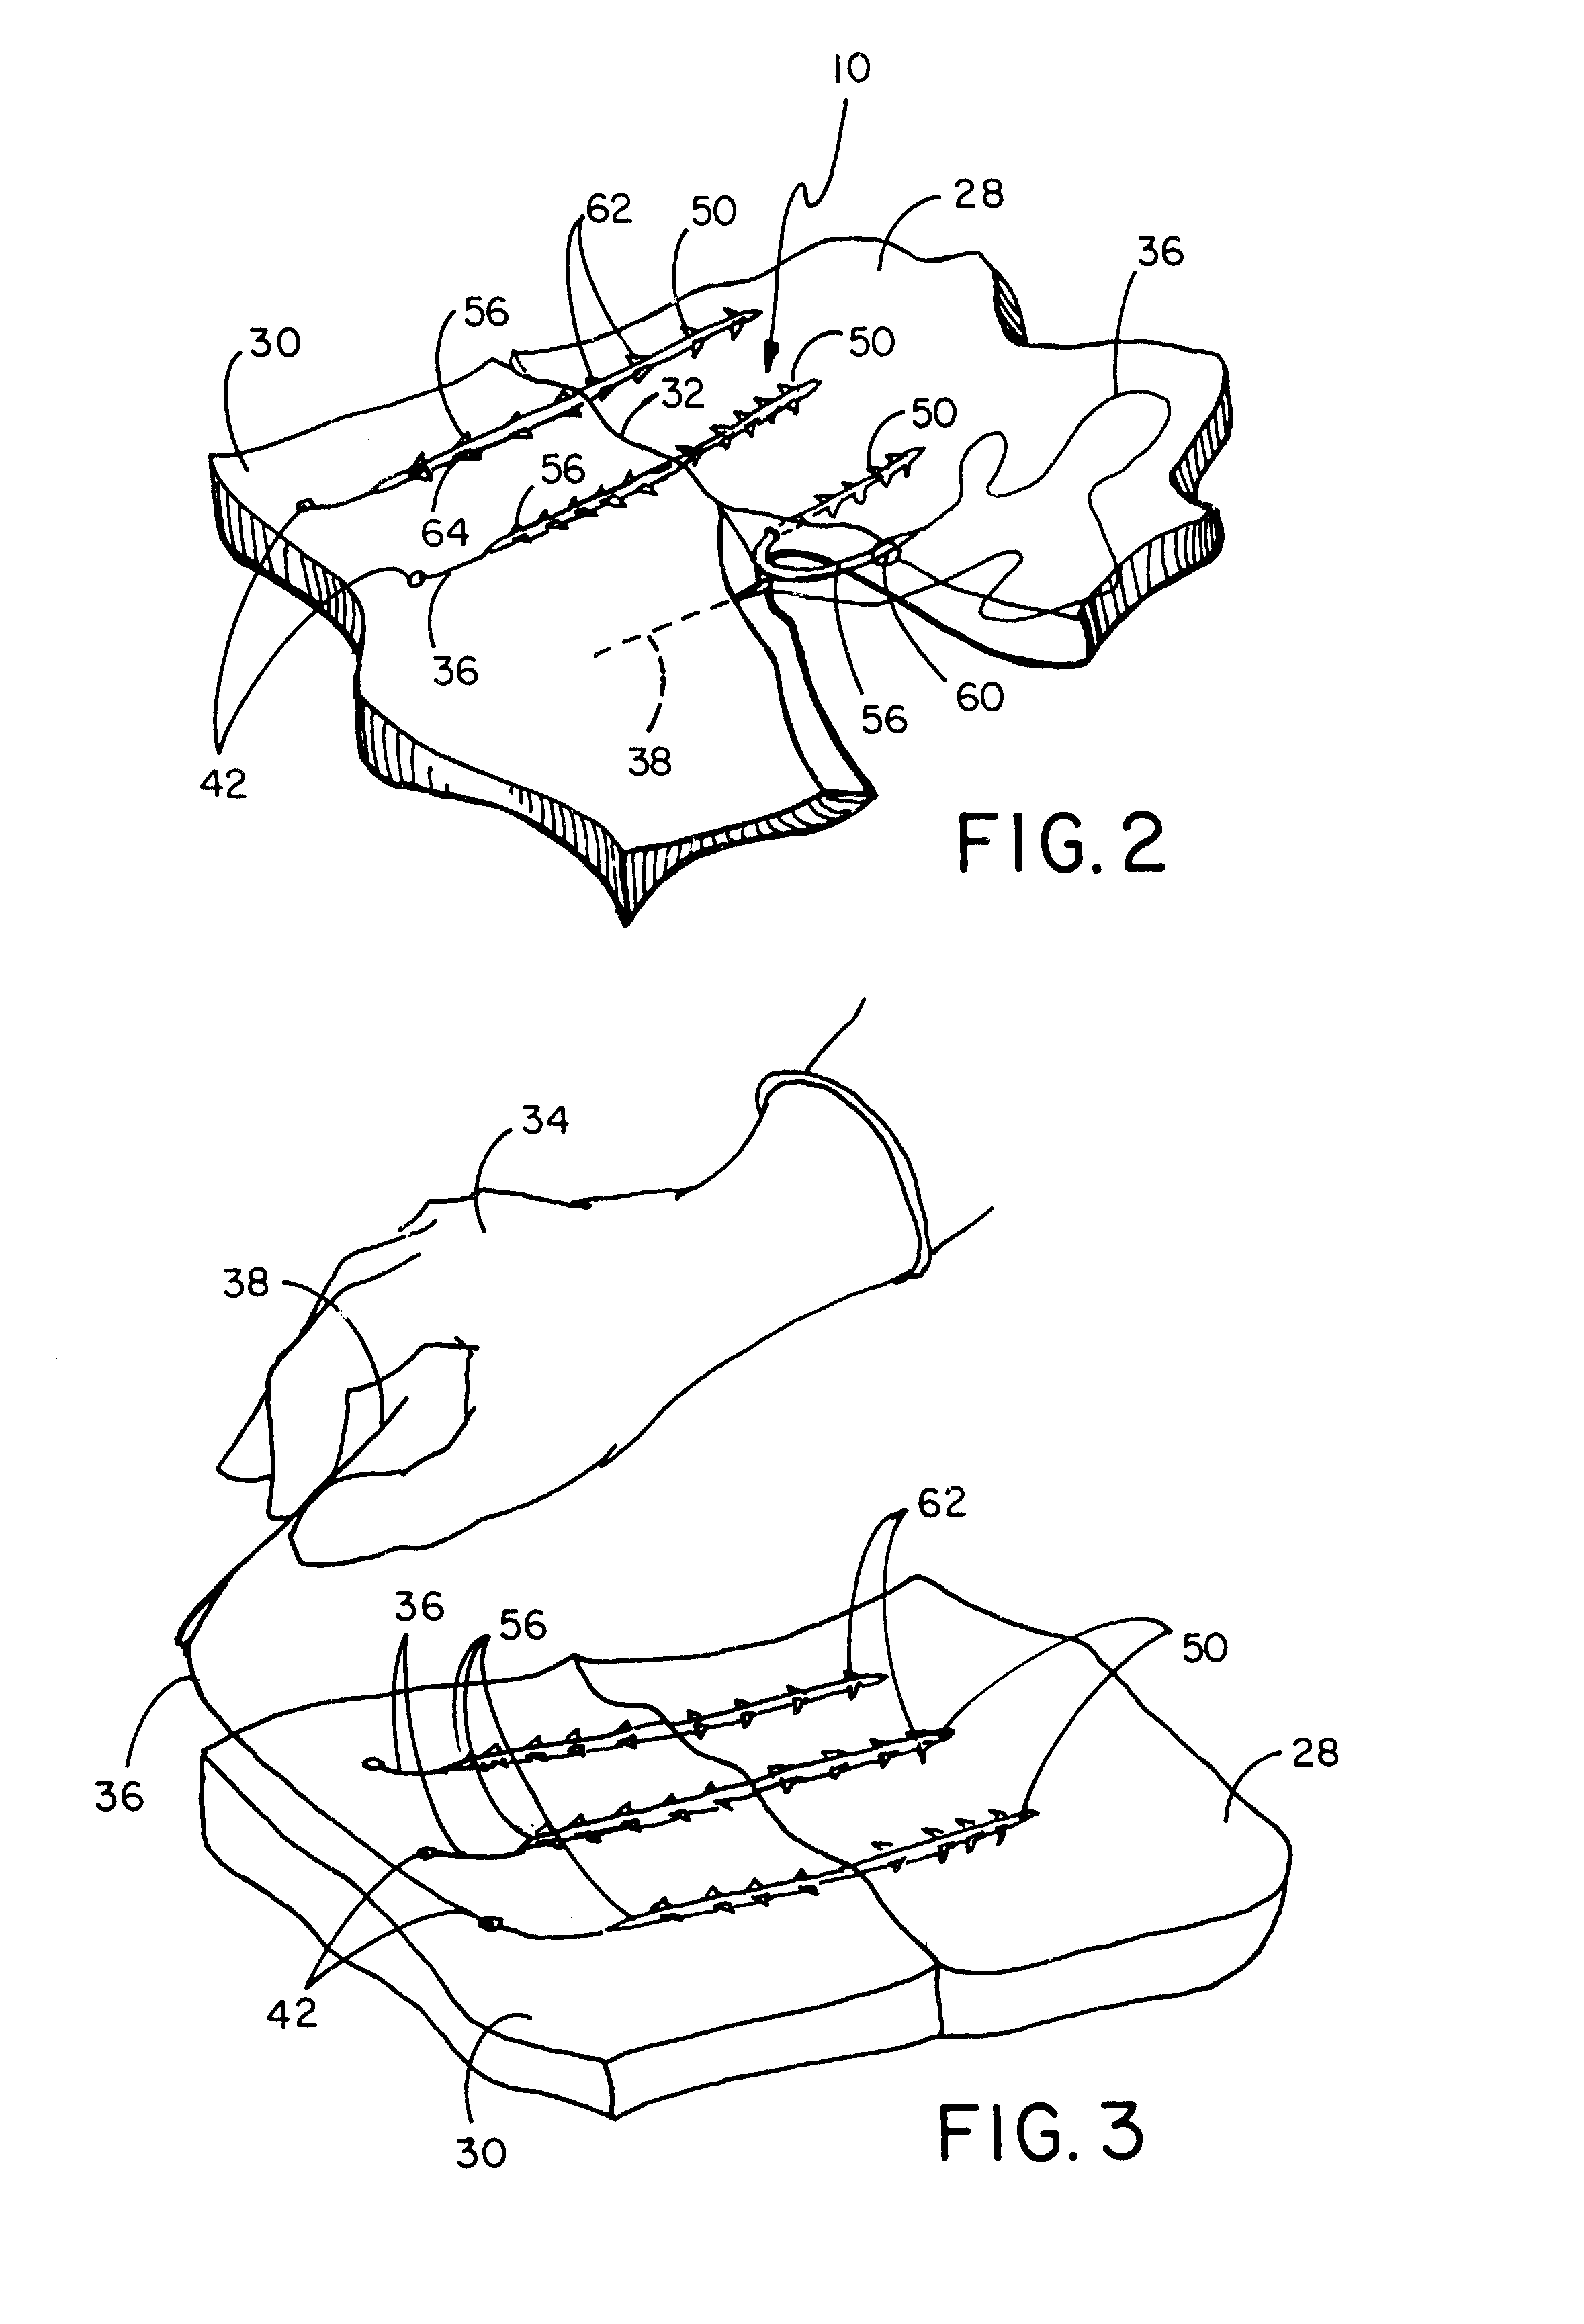 Suture and method of use